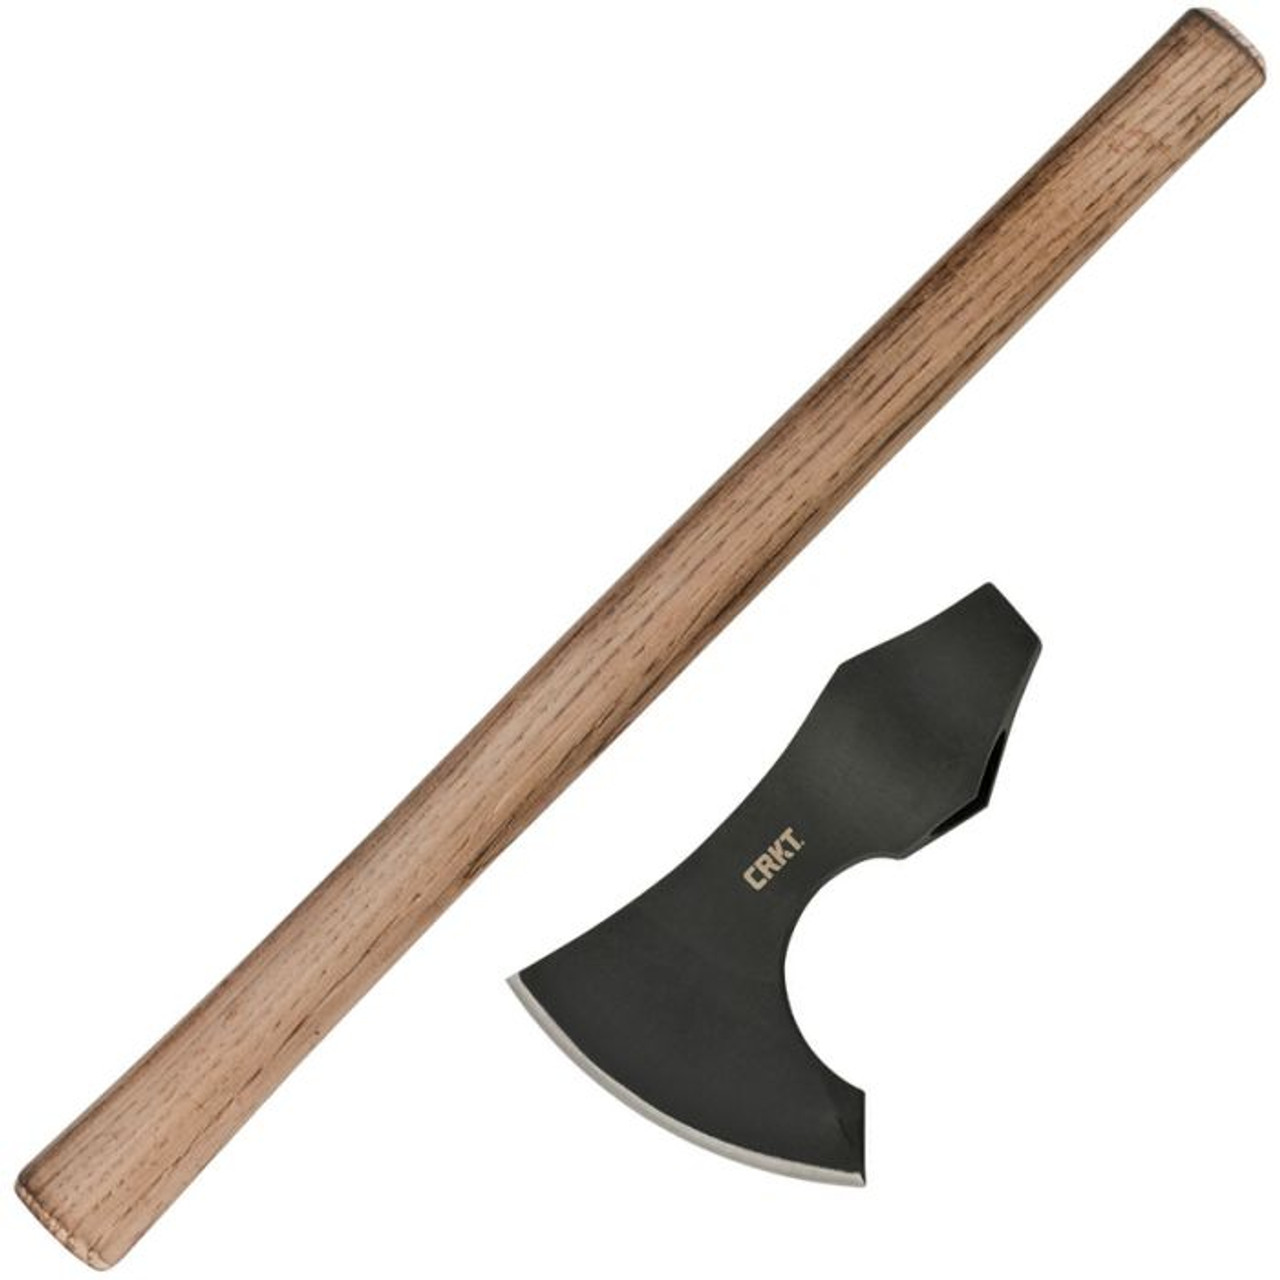 CRKT Berserker Axe (CR2736) 7.25" 1055 High Carbon Black Phosphate Coated Axe Head with a 4.63" Cutting Edge, Hickory Wood Handle